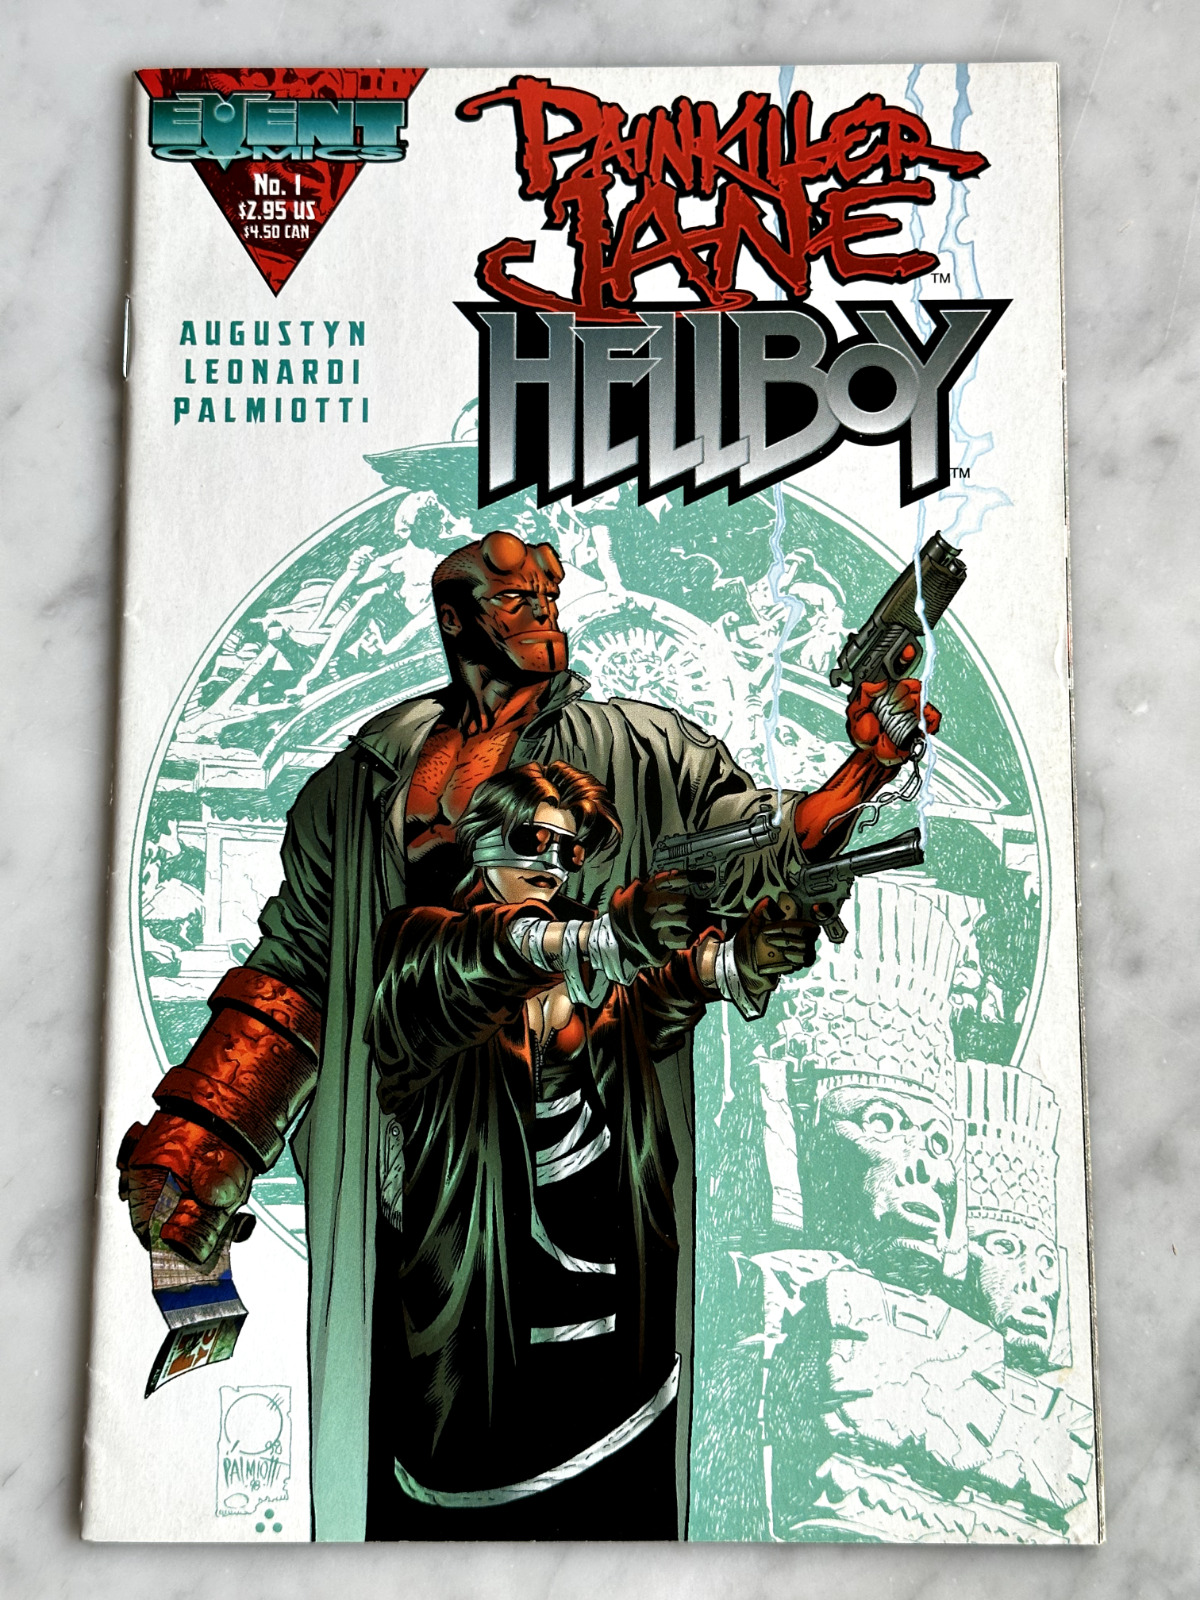 Painkiller Jane / Hellboy #1 AWESOME Crossover in HG! (Event Comics, 1998)